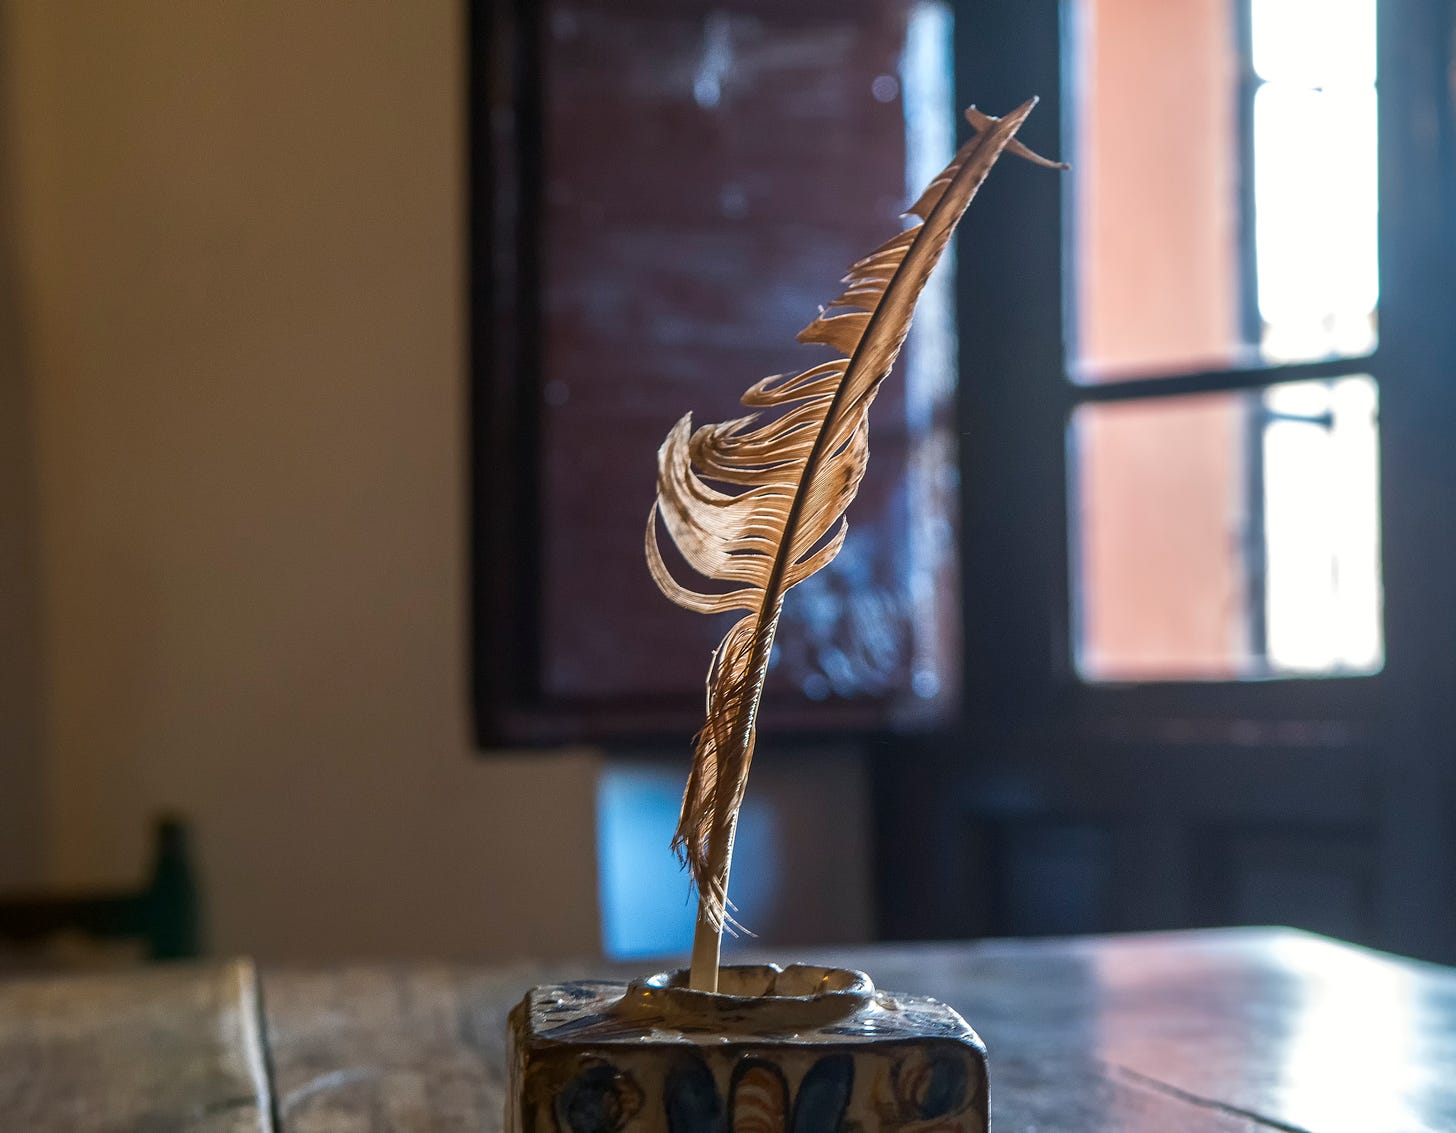 Quill pen in holder on table next to open window